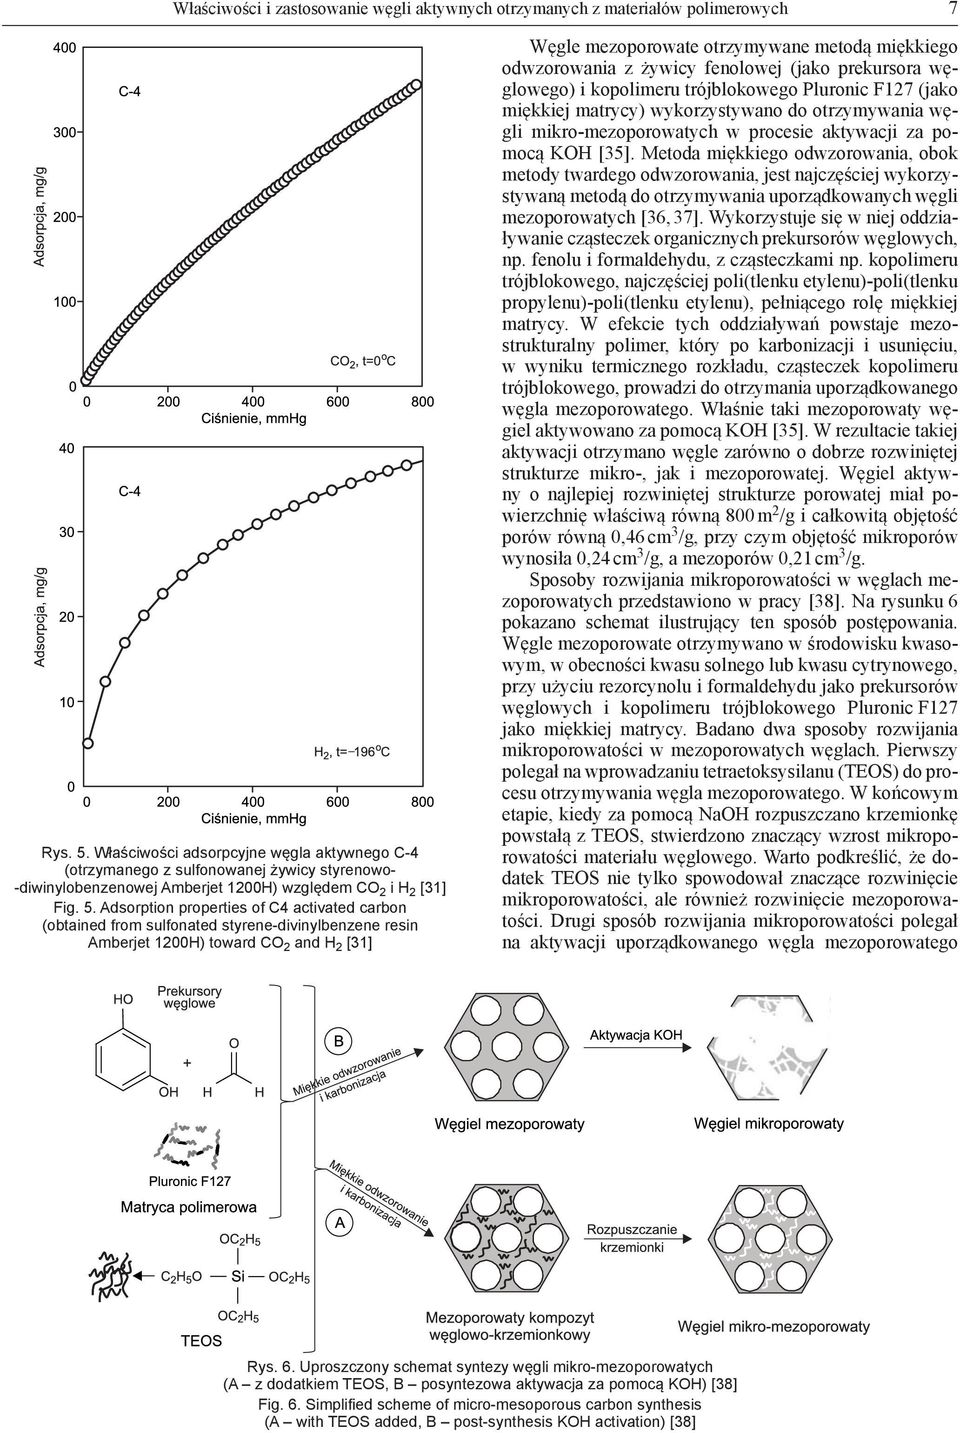 Adsorption properties of C4 activated carbon (obtained from sulfonated styrene-divinylbenzene resin Amberjet 1200H) toward CO 2 and H 2 [31] Węgle mezoporowate otrzymywane metodą miękkiego